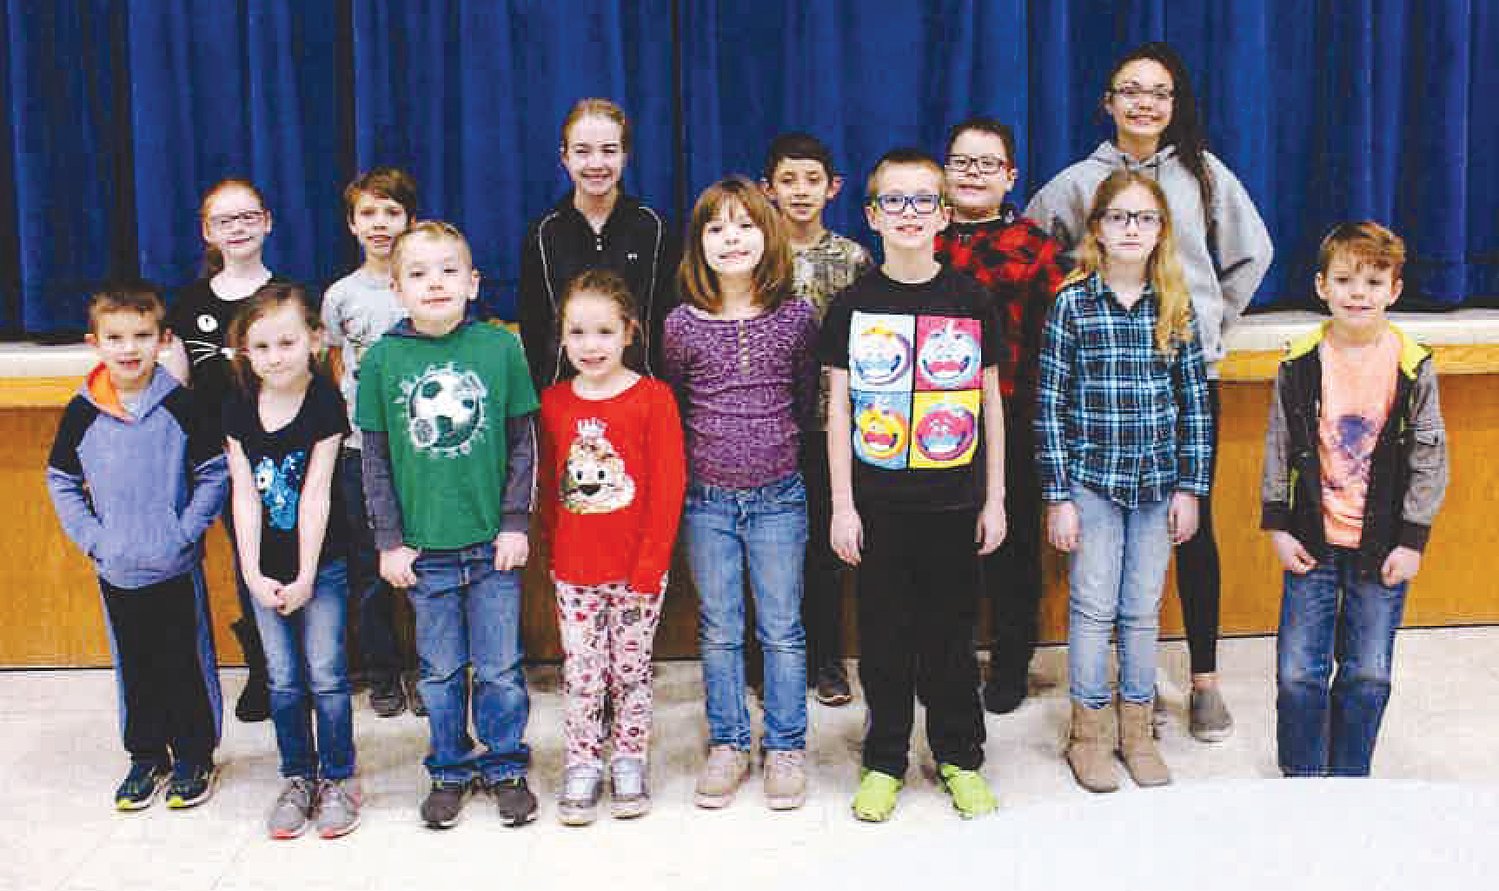 Students of the Month for November at Southeast Fountain Elementary School, are, from left, front row, Ben Ginter and Melanie Wolverton, kindergarten; Jacob Stocker and Lilly Roarks, first grade; Brooklyn Whitaker and Grant Nelson, second grade; and Faith Wadhams and Sebastien Phelps, third grade; and back row, Hayley Kler and Logan Cunningham, fourth grade; Damien Warrick and Olivia Jones, fifth grade; and Mackenzie Lewis and Raiden Plaza, sixth grade.